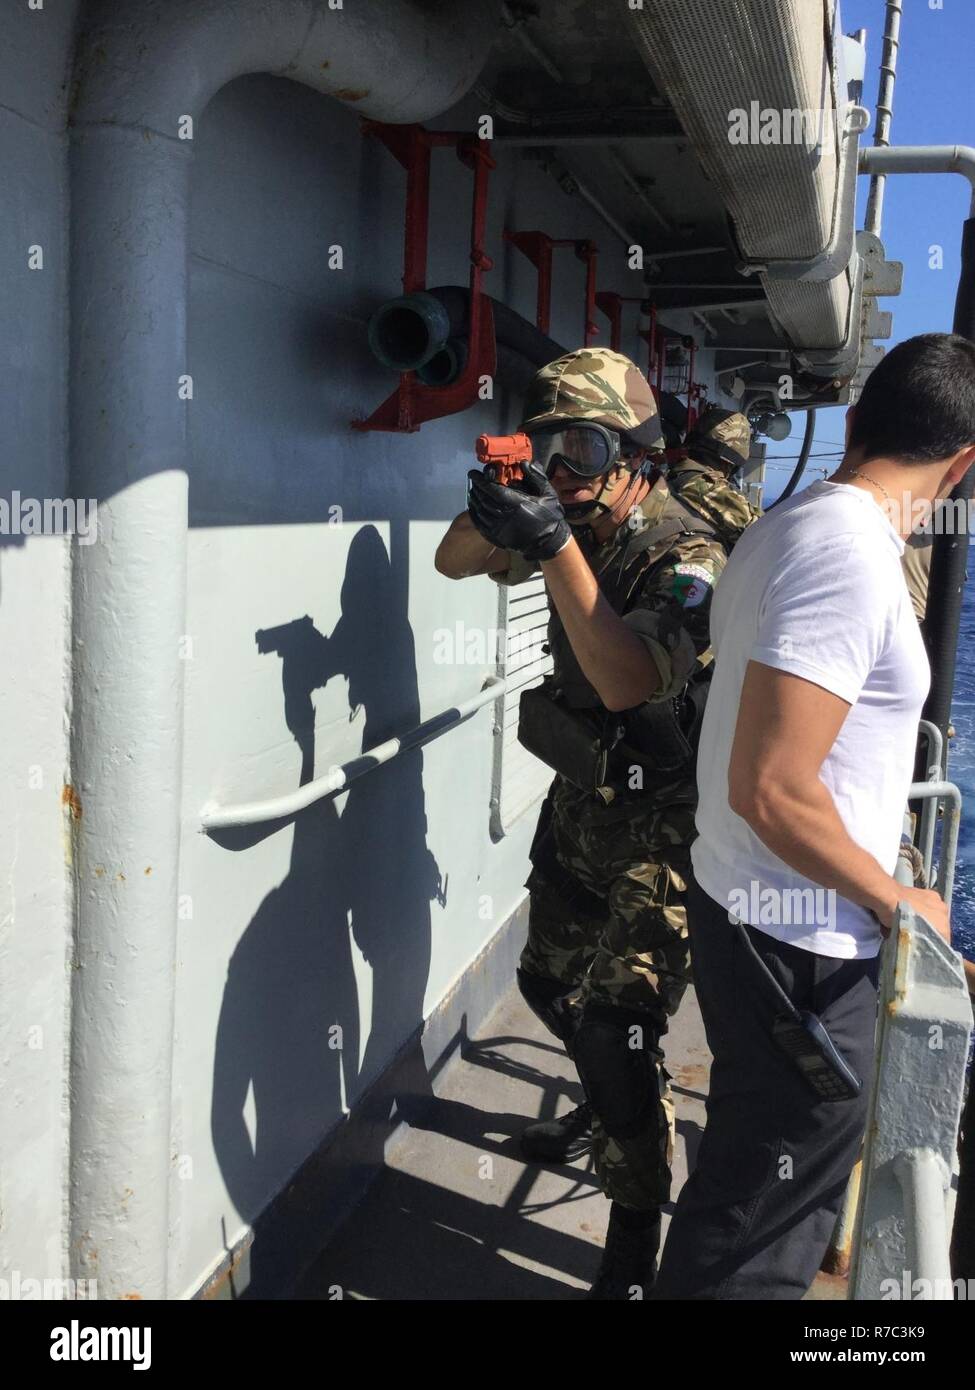 MEDITERRANEAN SEA (May 15, 2017) Algerian sailors practiced visit, board, search and seizure techniques during exercise Phoenix Express 2017, May 15. Phoenix Express, sponsored by U.S. Africa Command and facilitated by U.S. Naval Forces Europe-Africa/U.S. 6th Fleet, is designed to improve regional cooperation, increase maritime domain awareness information sharing practices, and operational capabilities to enhance efforts to achieve safety and security in the Mediterranean Sea. ( Stock Photo